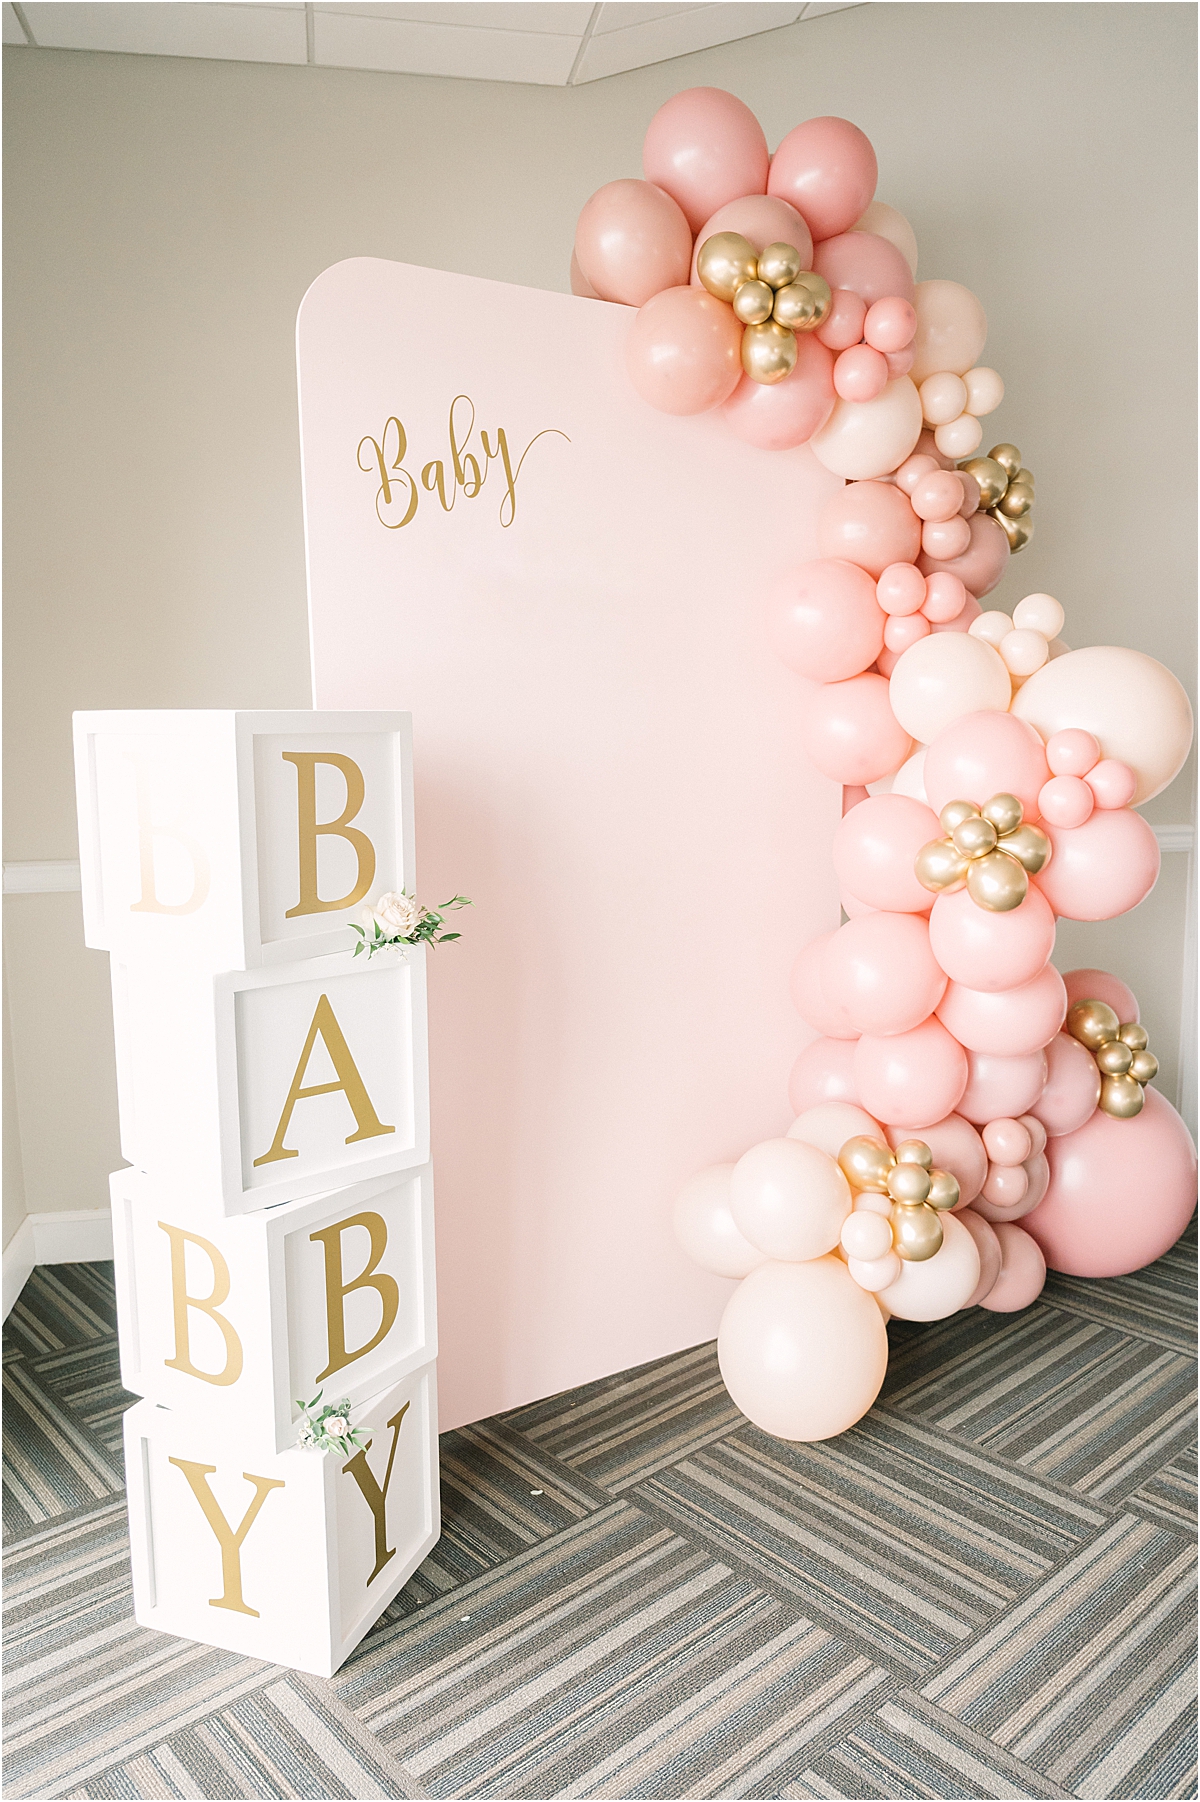 photobooth baby shower with balloons